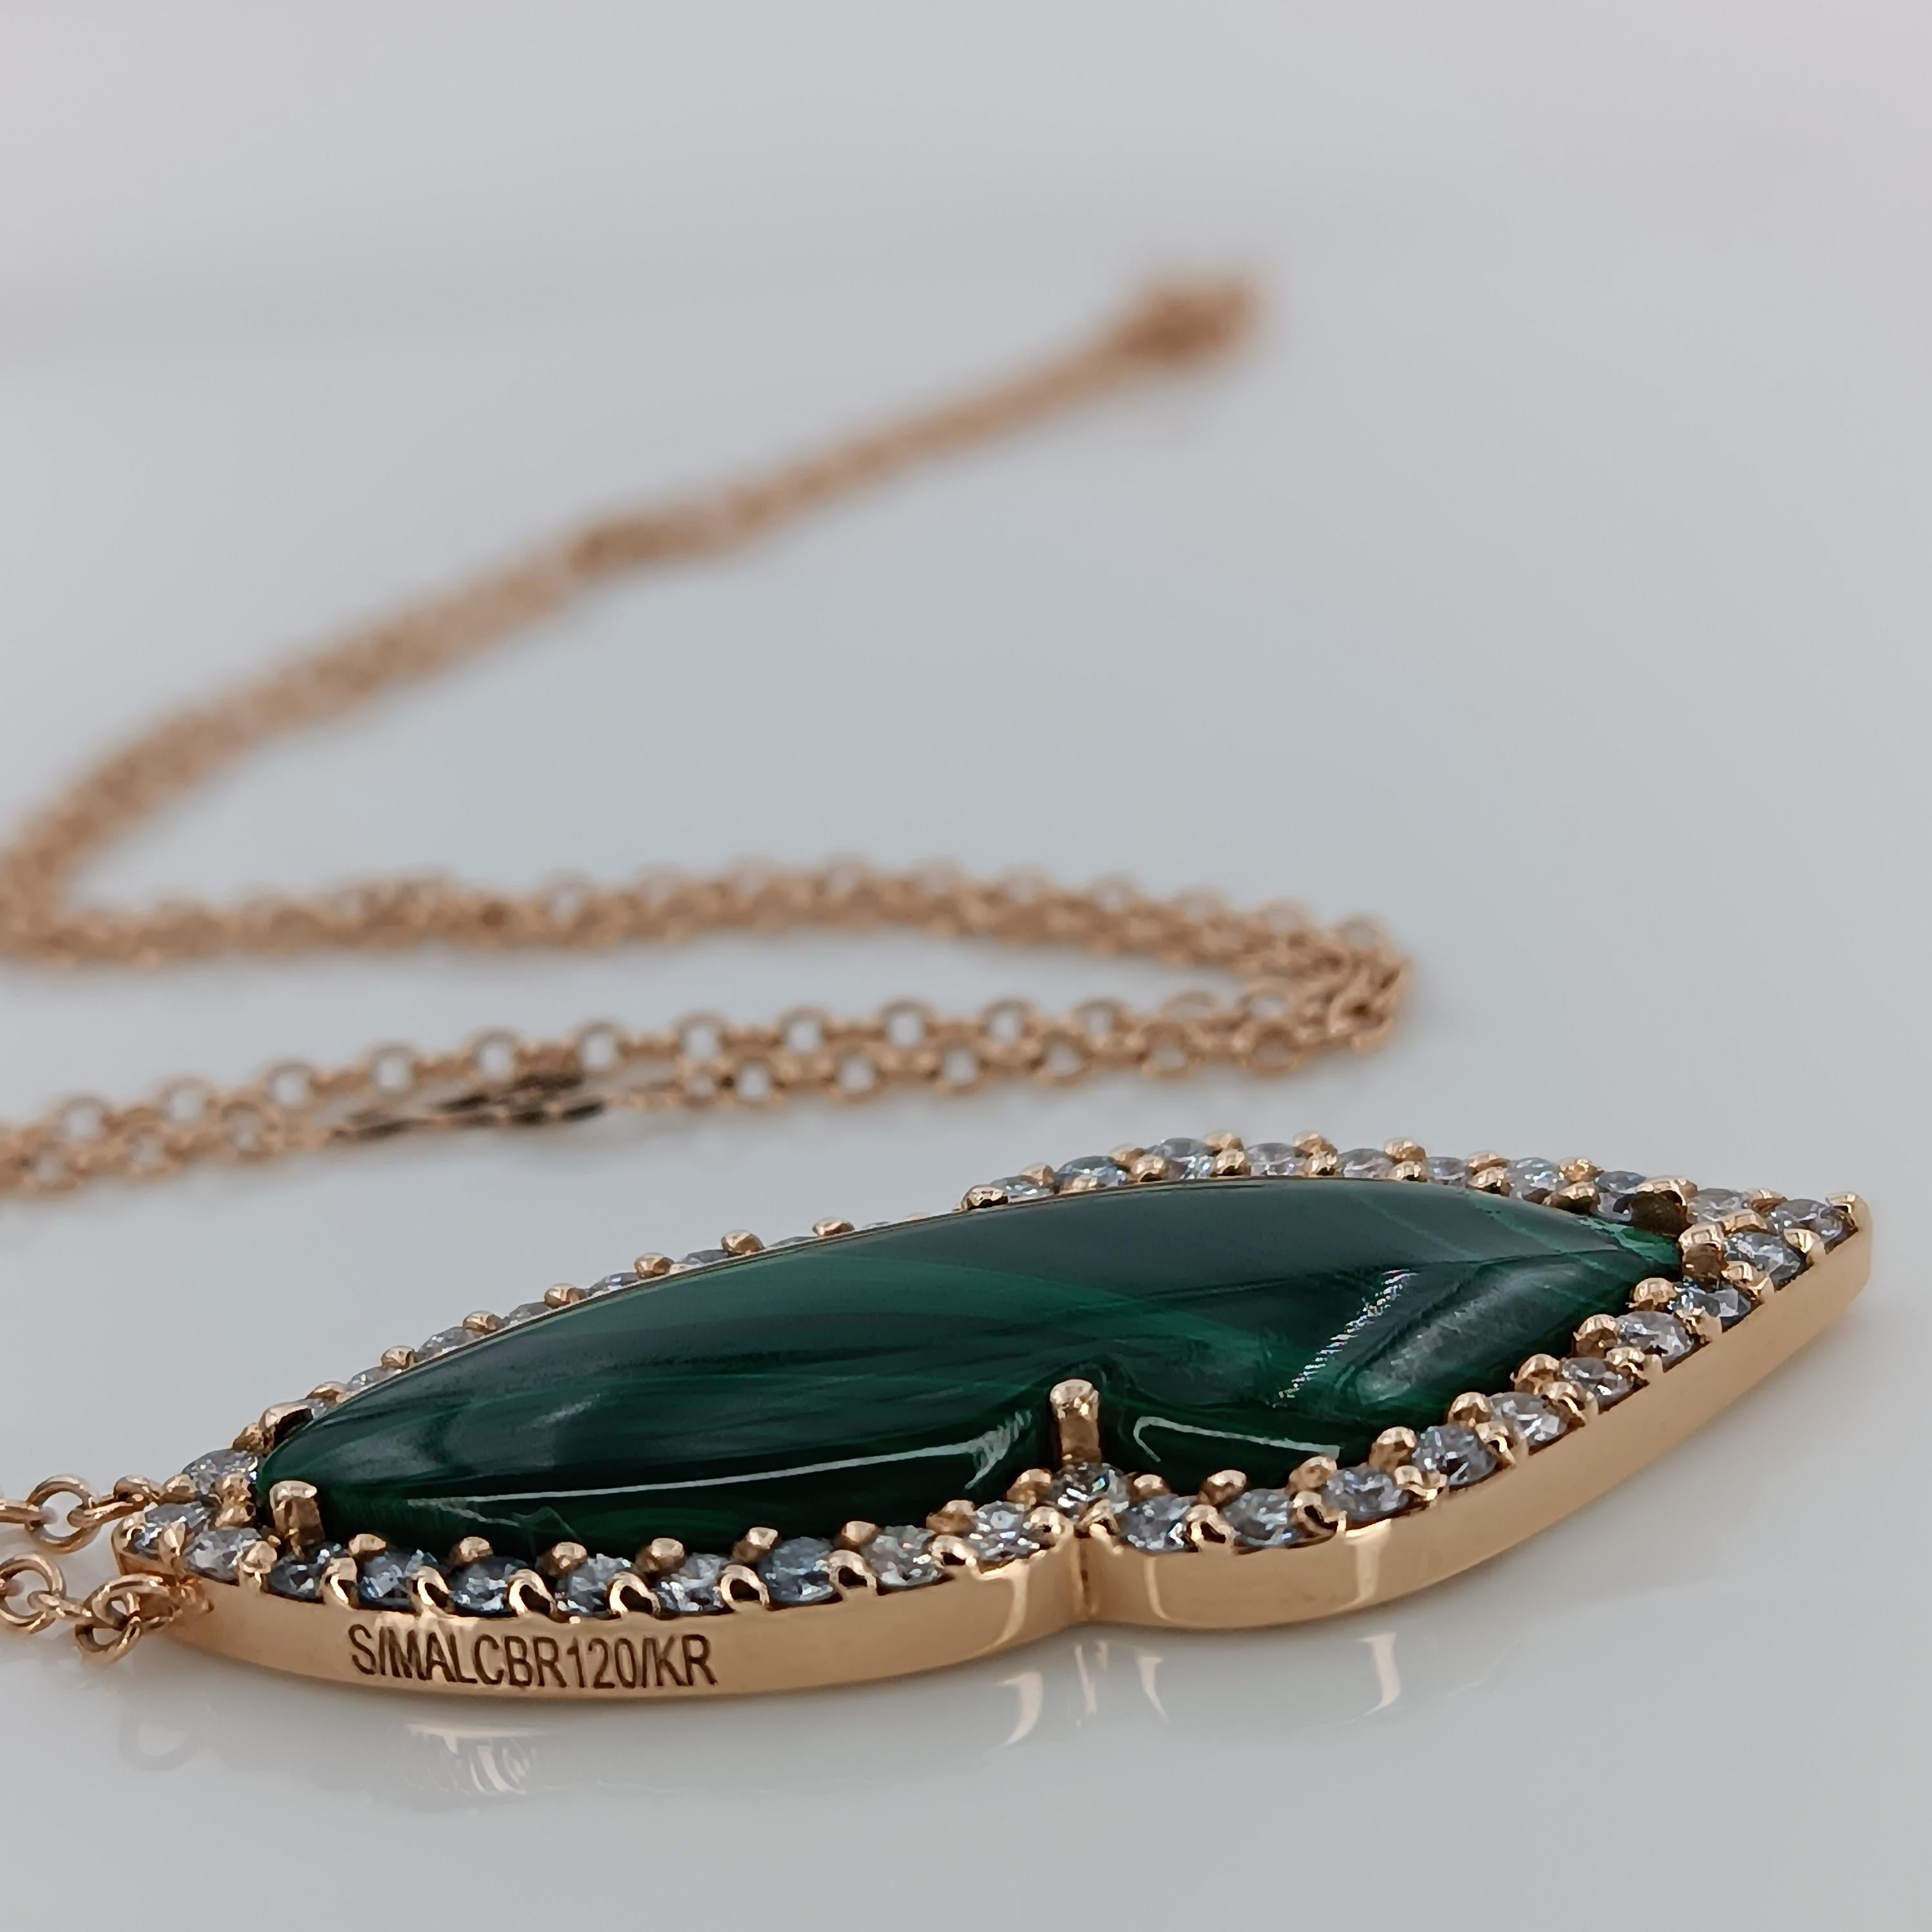 This wonderful Leo Milano pendant from our Isola collection shows in every detail a very complicate yet perfectly done workmanship. The pendant and the chain are in 18 carat rose gold with a malachite . The object weights 14.13 grams diamonds 1.20